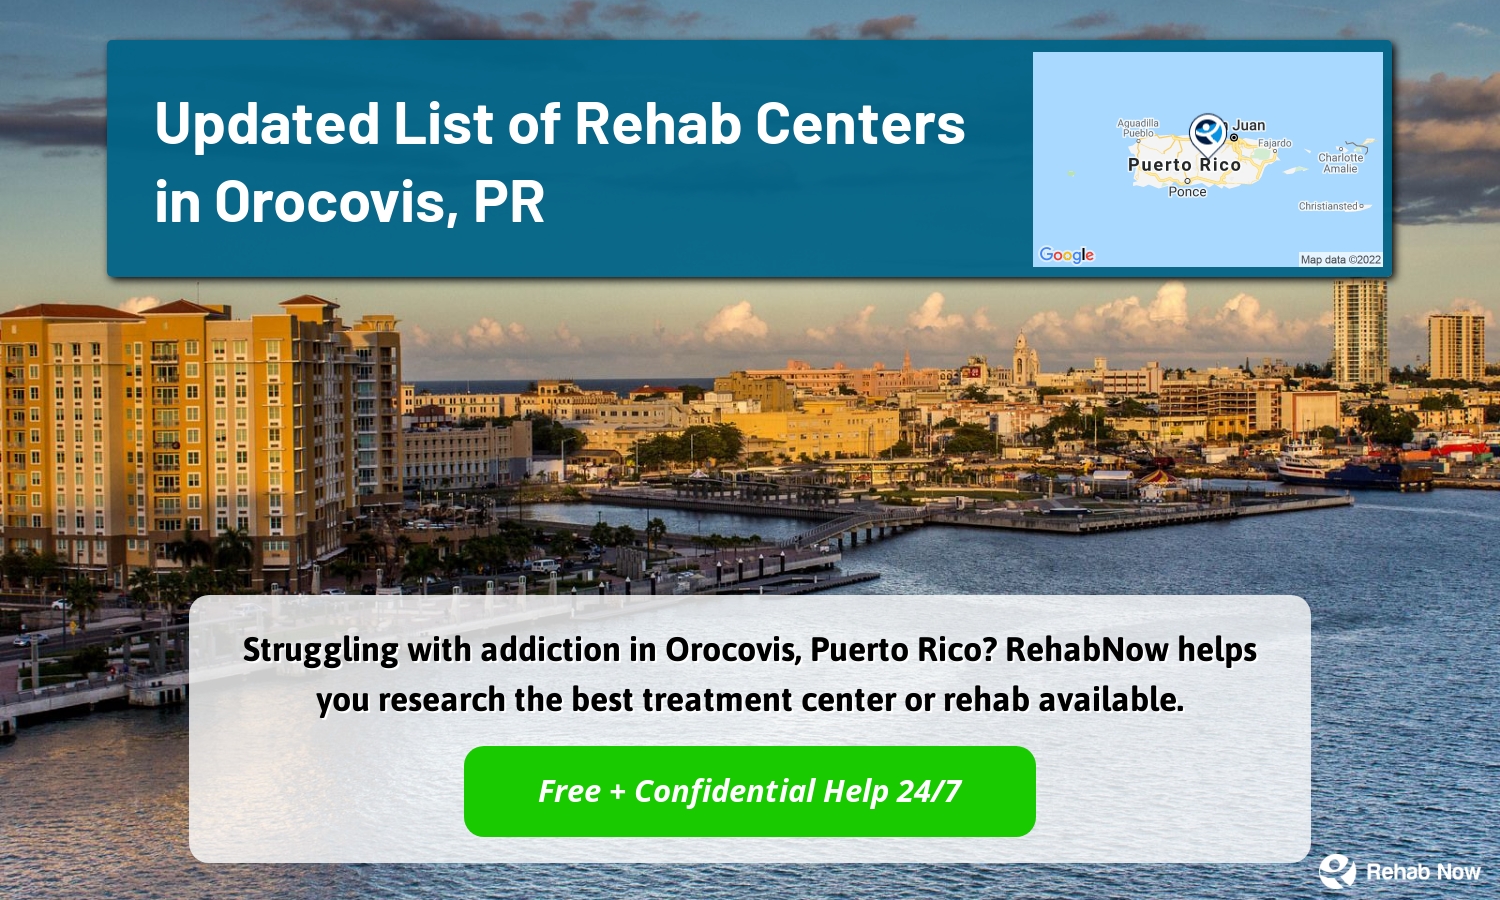 Struggling with addiction in Orocovis, Puerto Rico? RehabNow helps you research the best treatment center or rehab available.